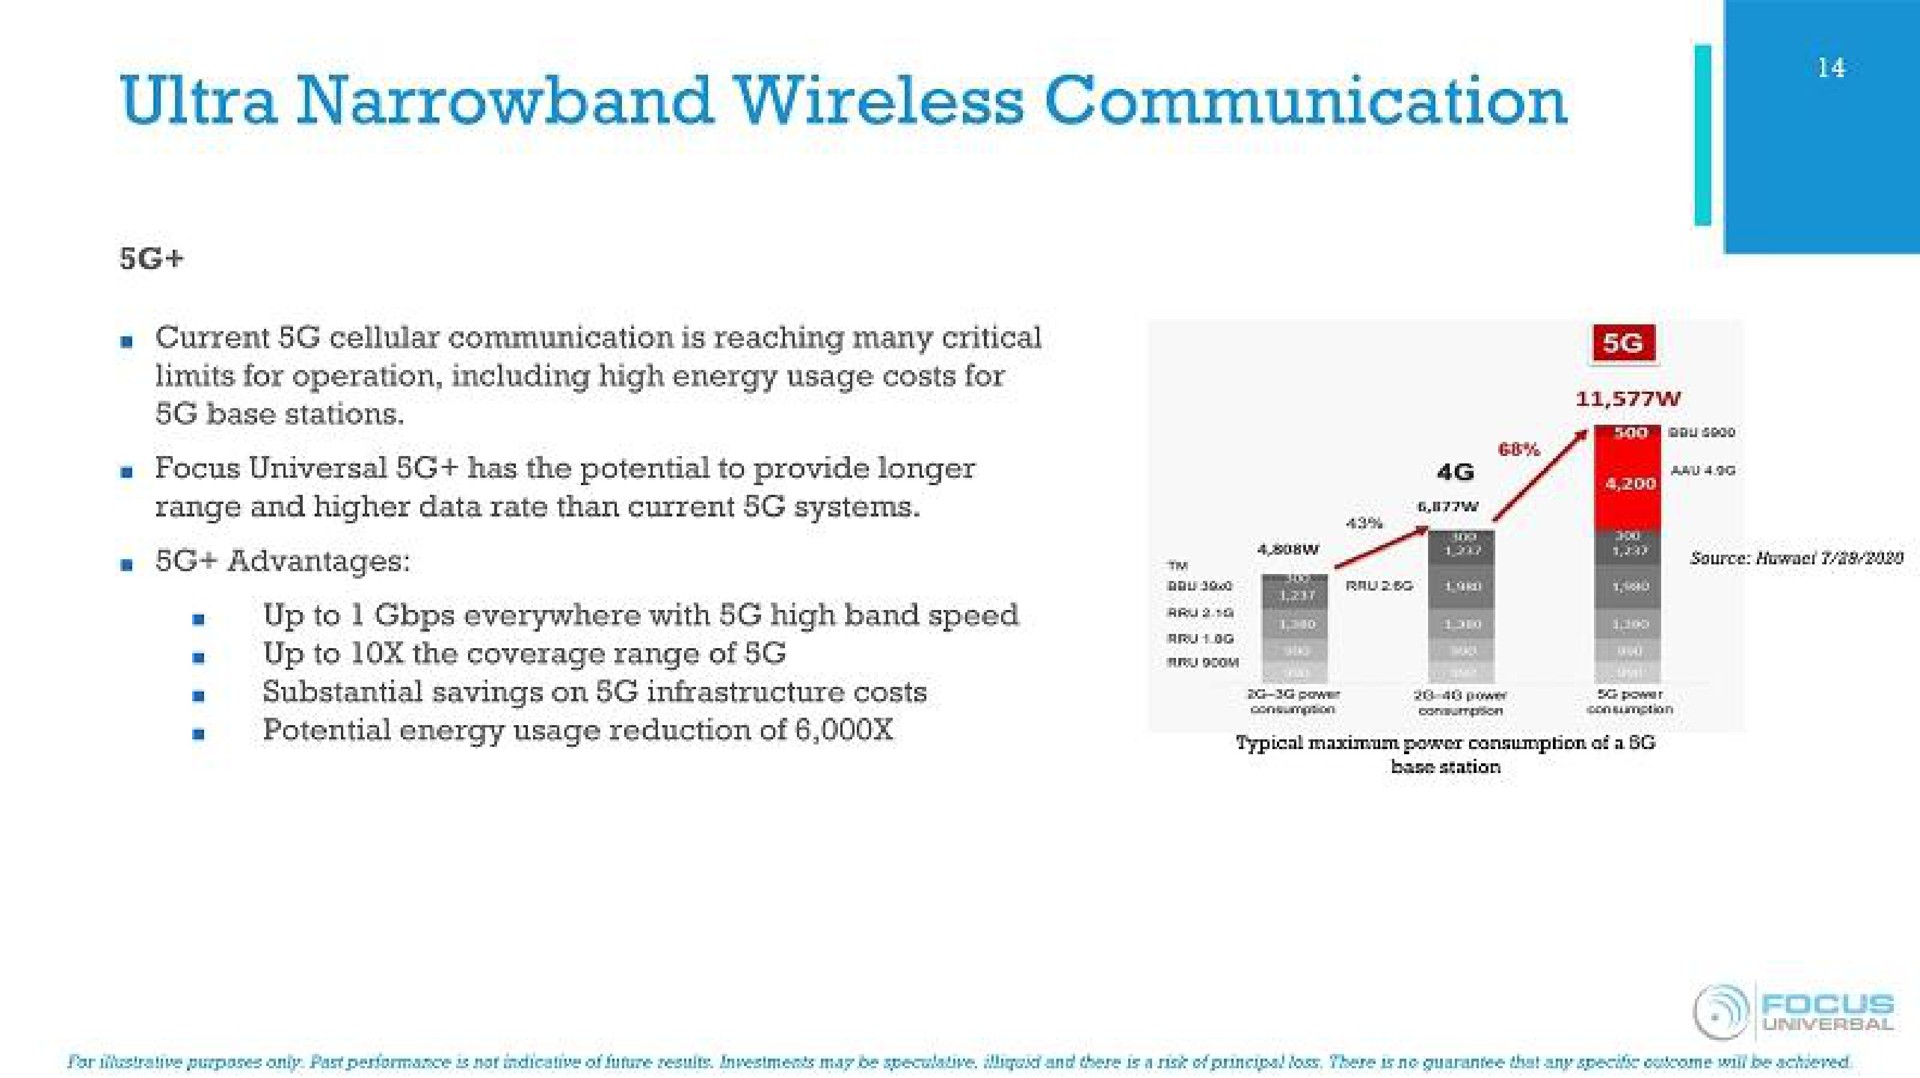 ultra wireless communication current cellular communication is reaching many critical limits for operation including high energy usage costs for base stations focus universal has the potential to provide longer advantages everywhere with high band speed substantial savings on infrastructure costs potential energy usage reduction of lee power tepid avian a source focus | Focus Universal